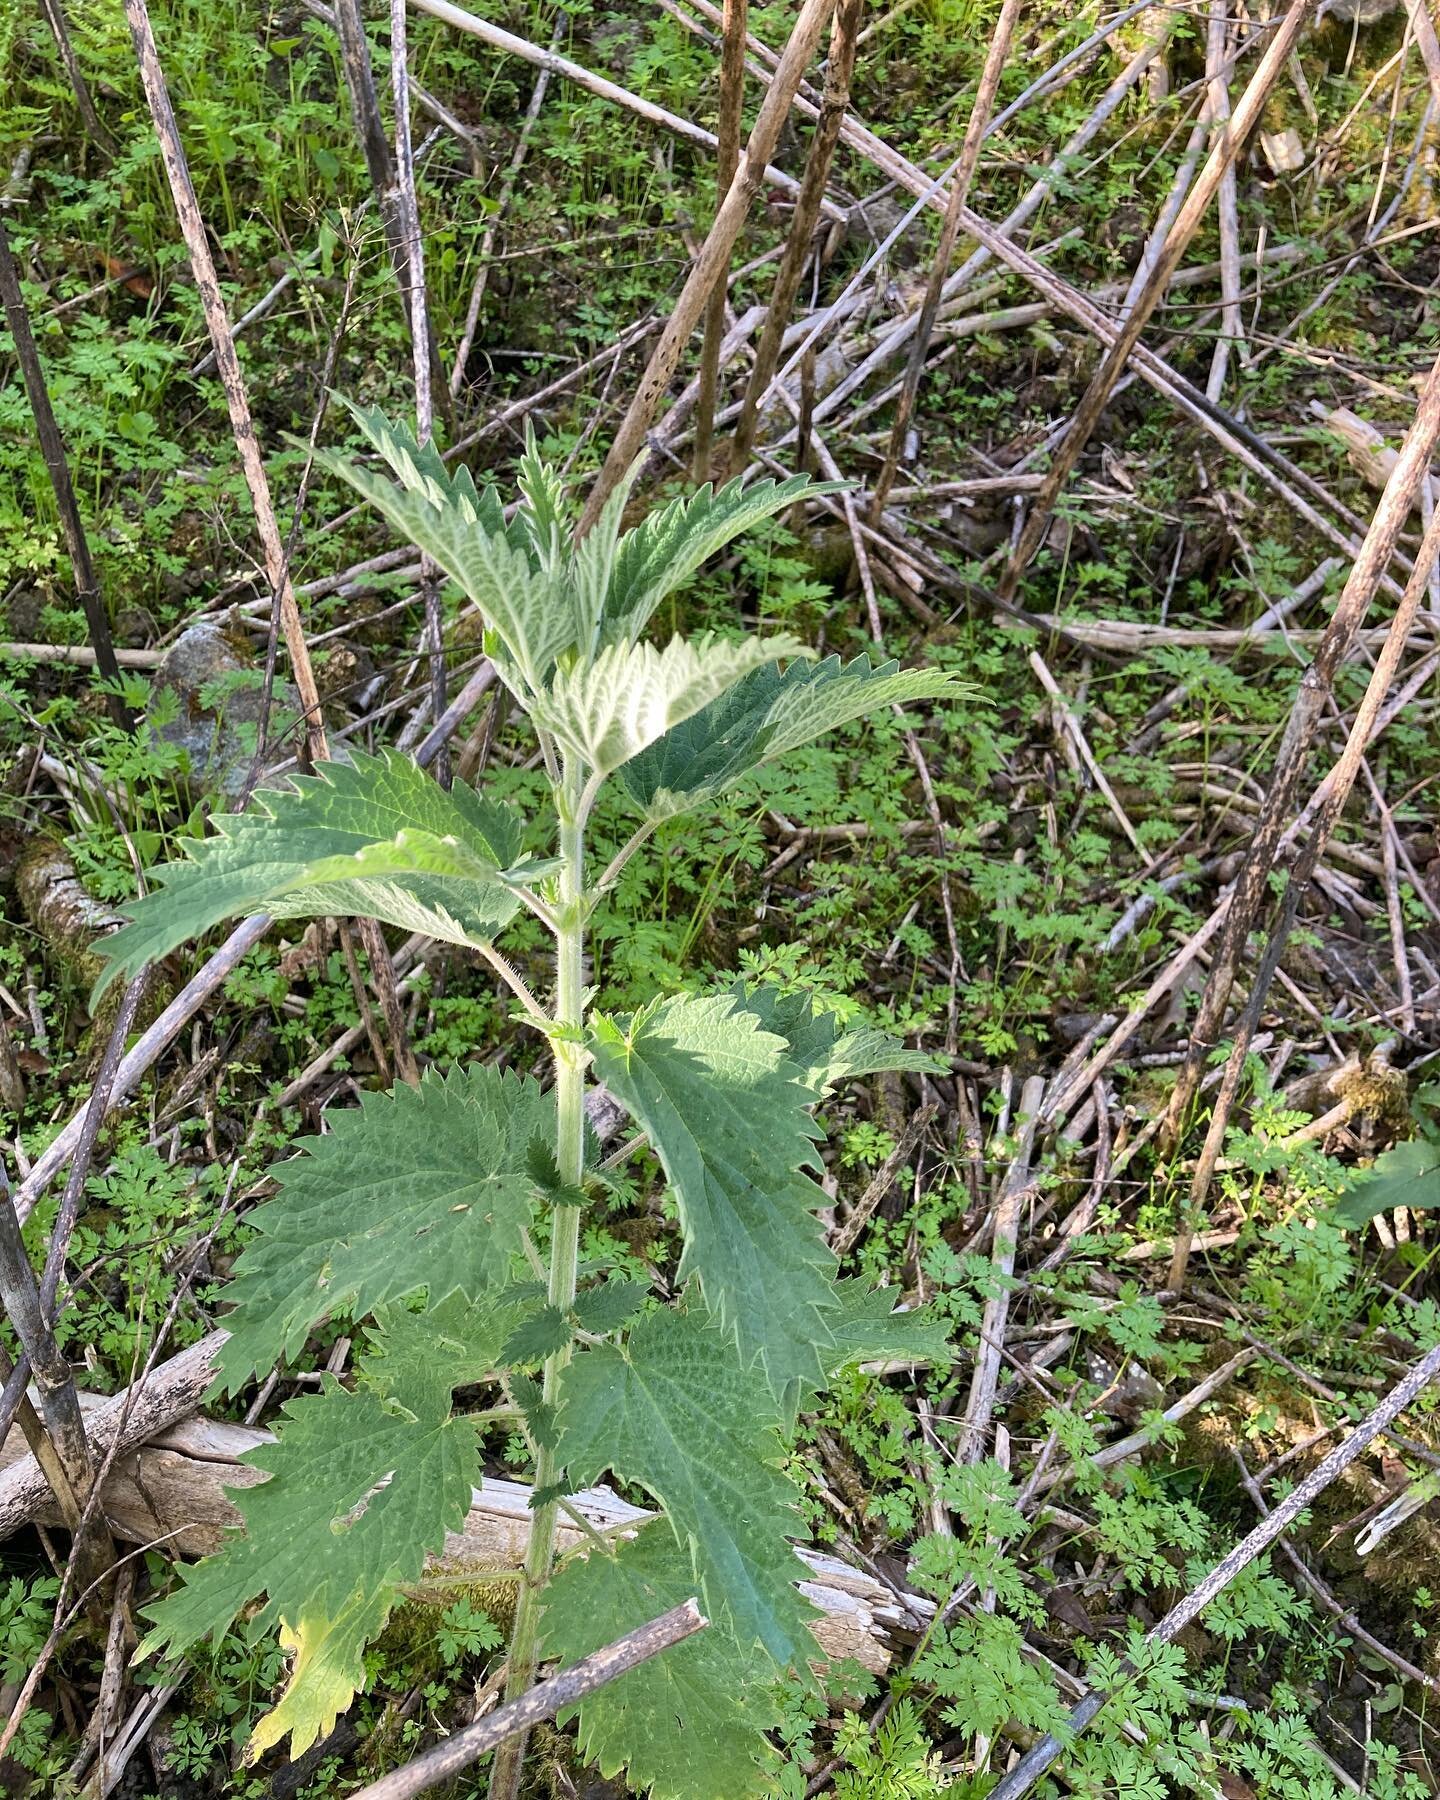 All the pricklies on the path&hellip; Nettles, thistle and wild artichoke! East bay hills are full of protective plant adaptation.